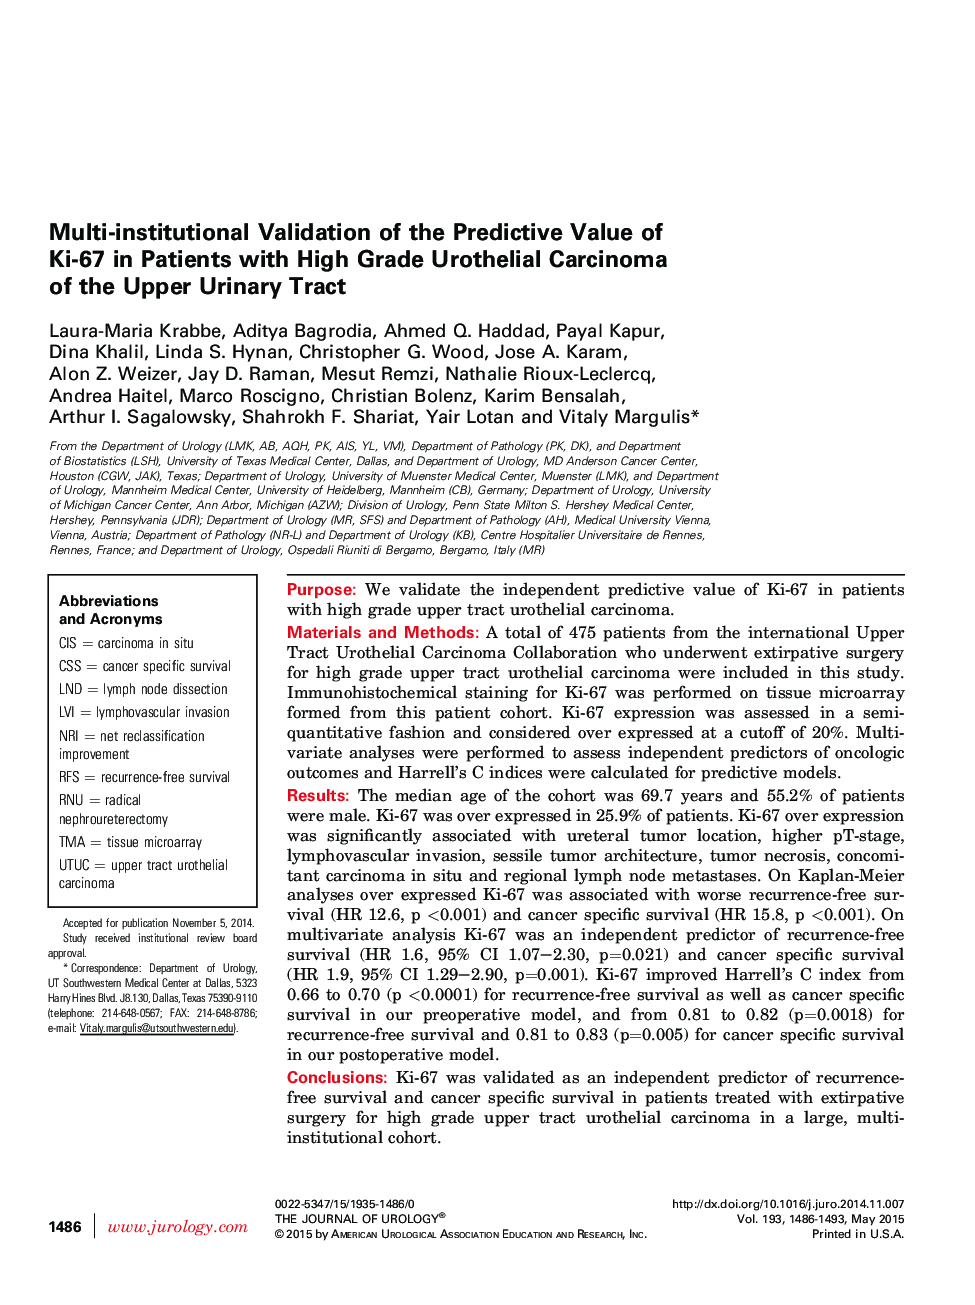 Multi-institutional Validation of the Predictive Value of Ki-67 in Patients with High Grade Urothelial Carcinoma of the Upper Urinary Tract